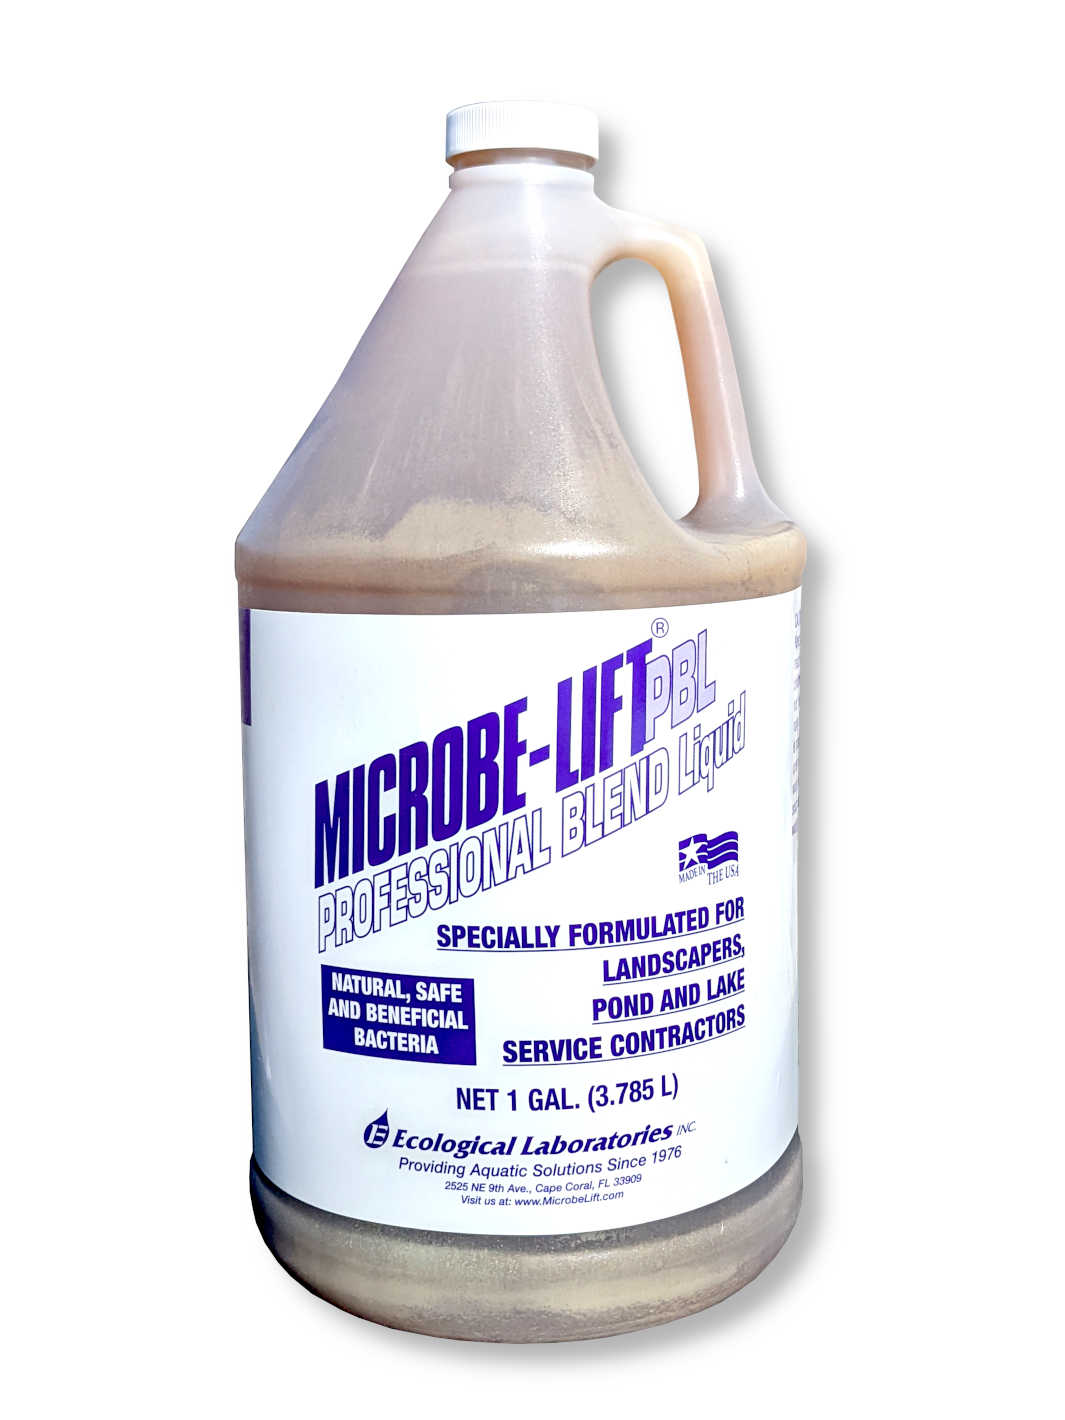 Microbe-Lift Professional Blend Liquid for Pond and Lake Service Contractors